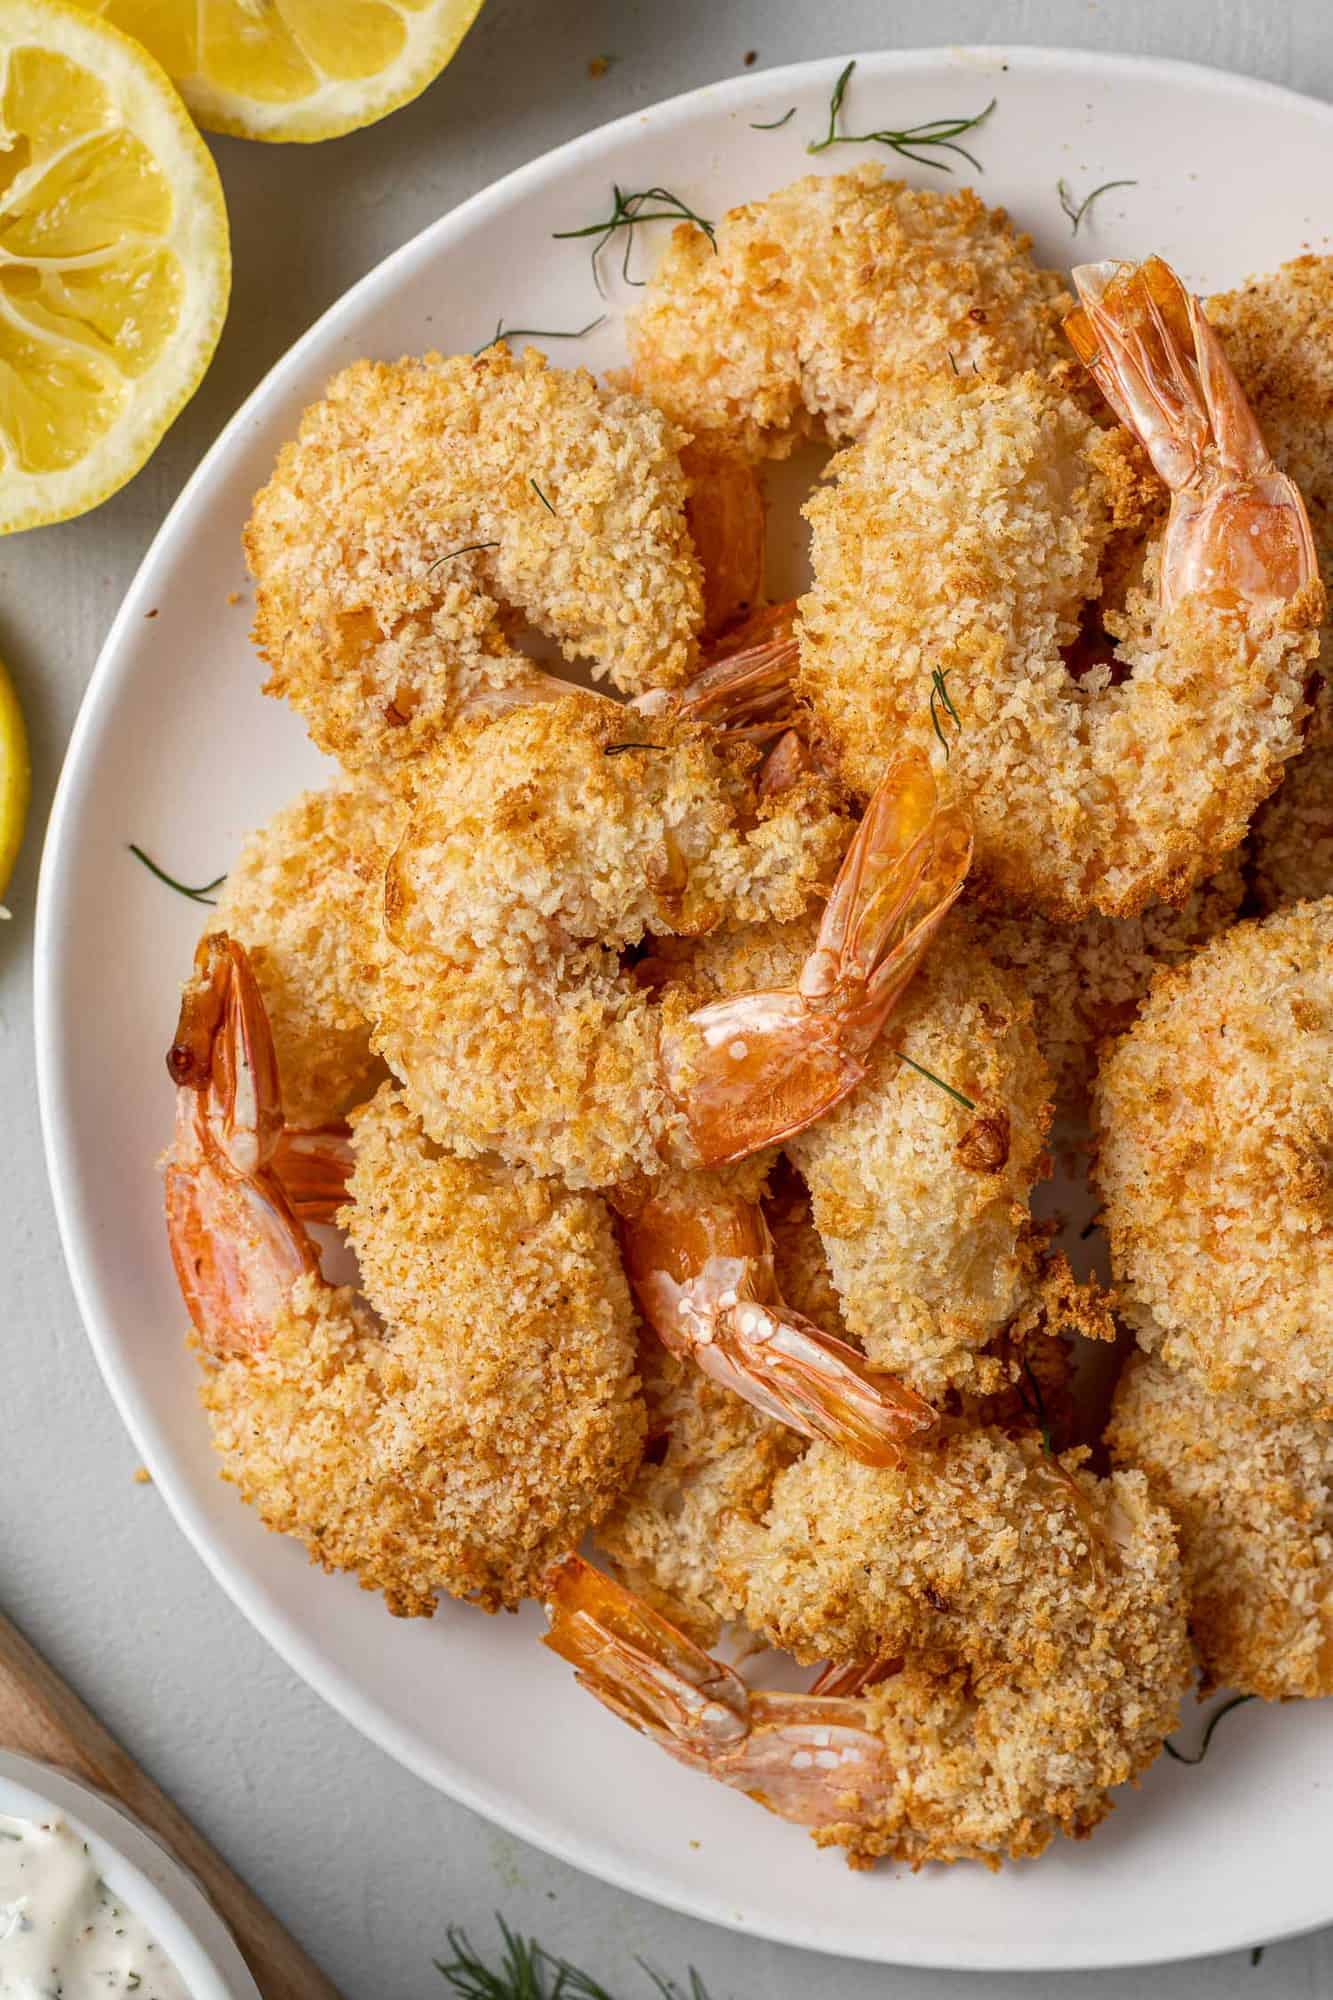 Breaded and cooked shrimp piled up on a white plate.